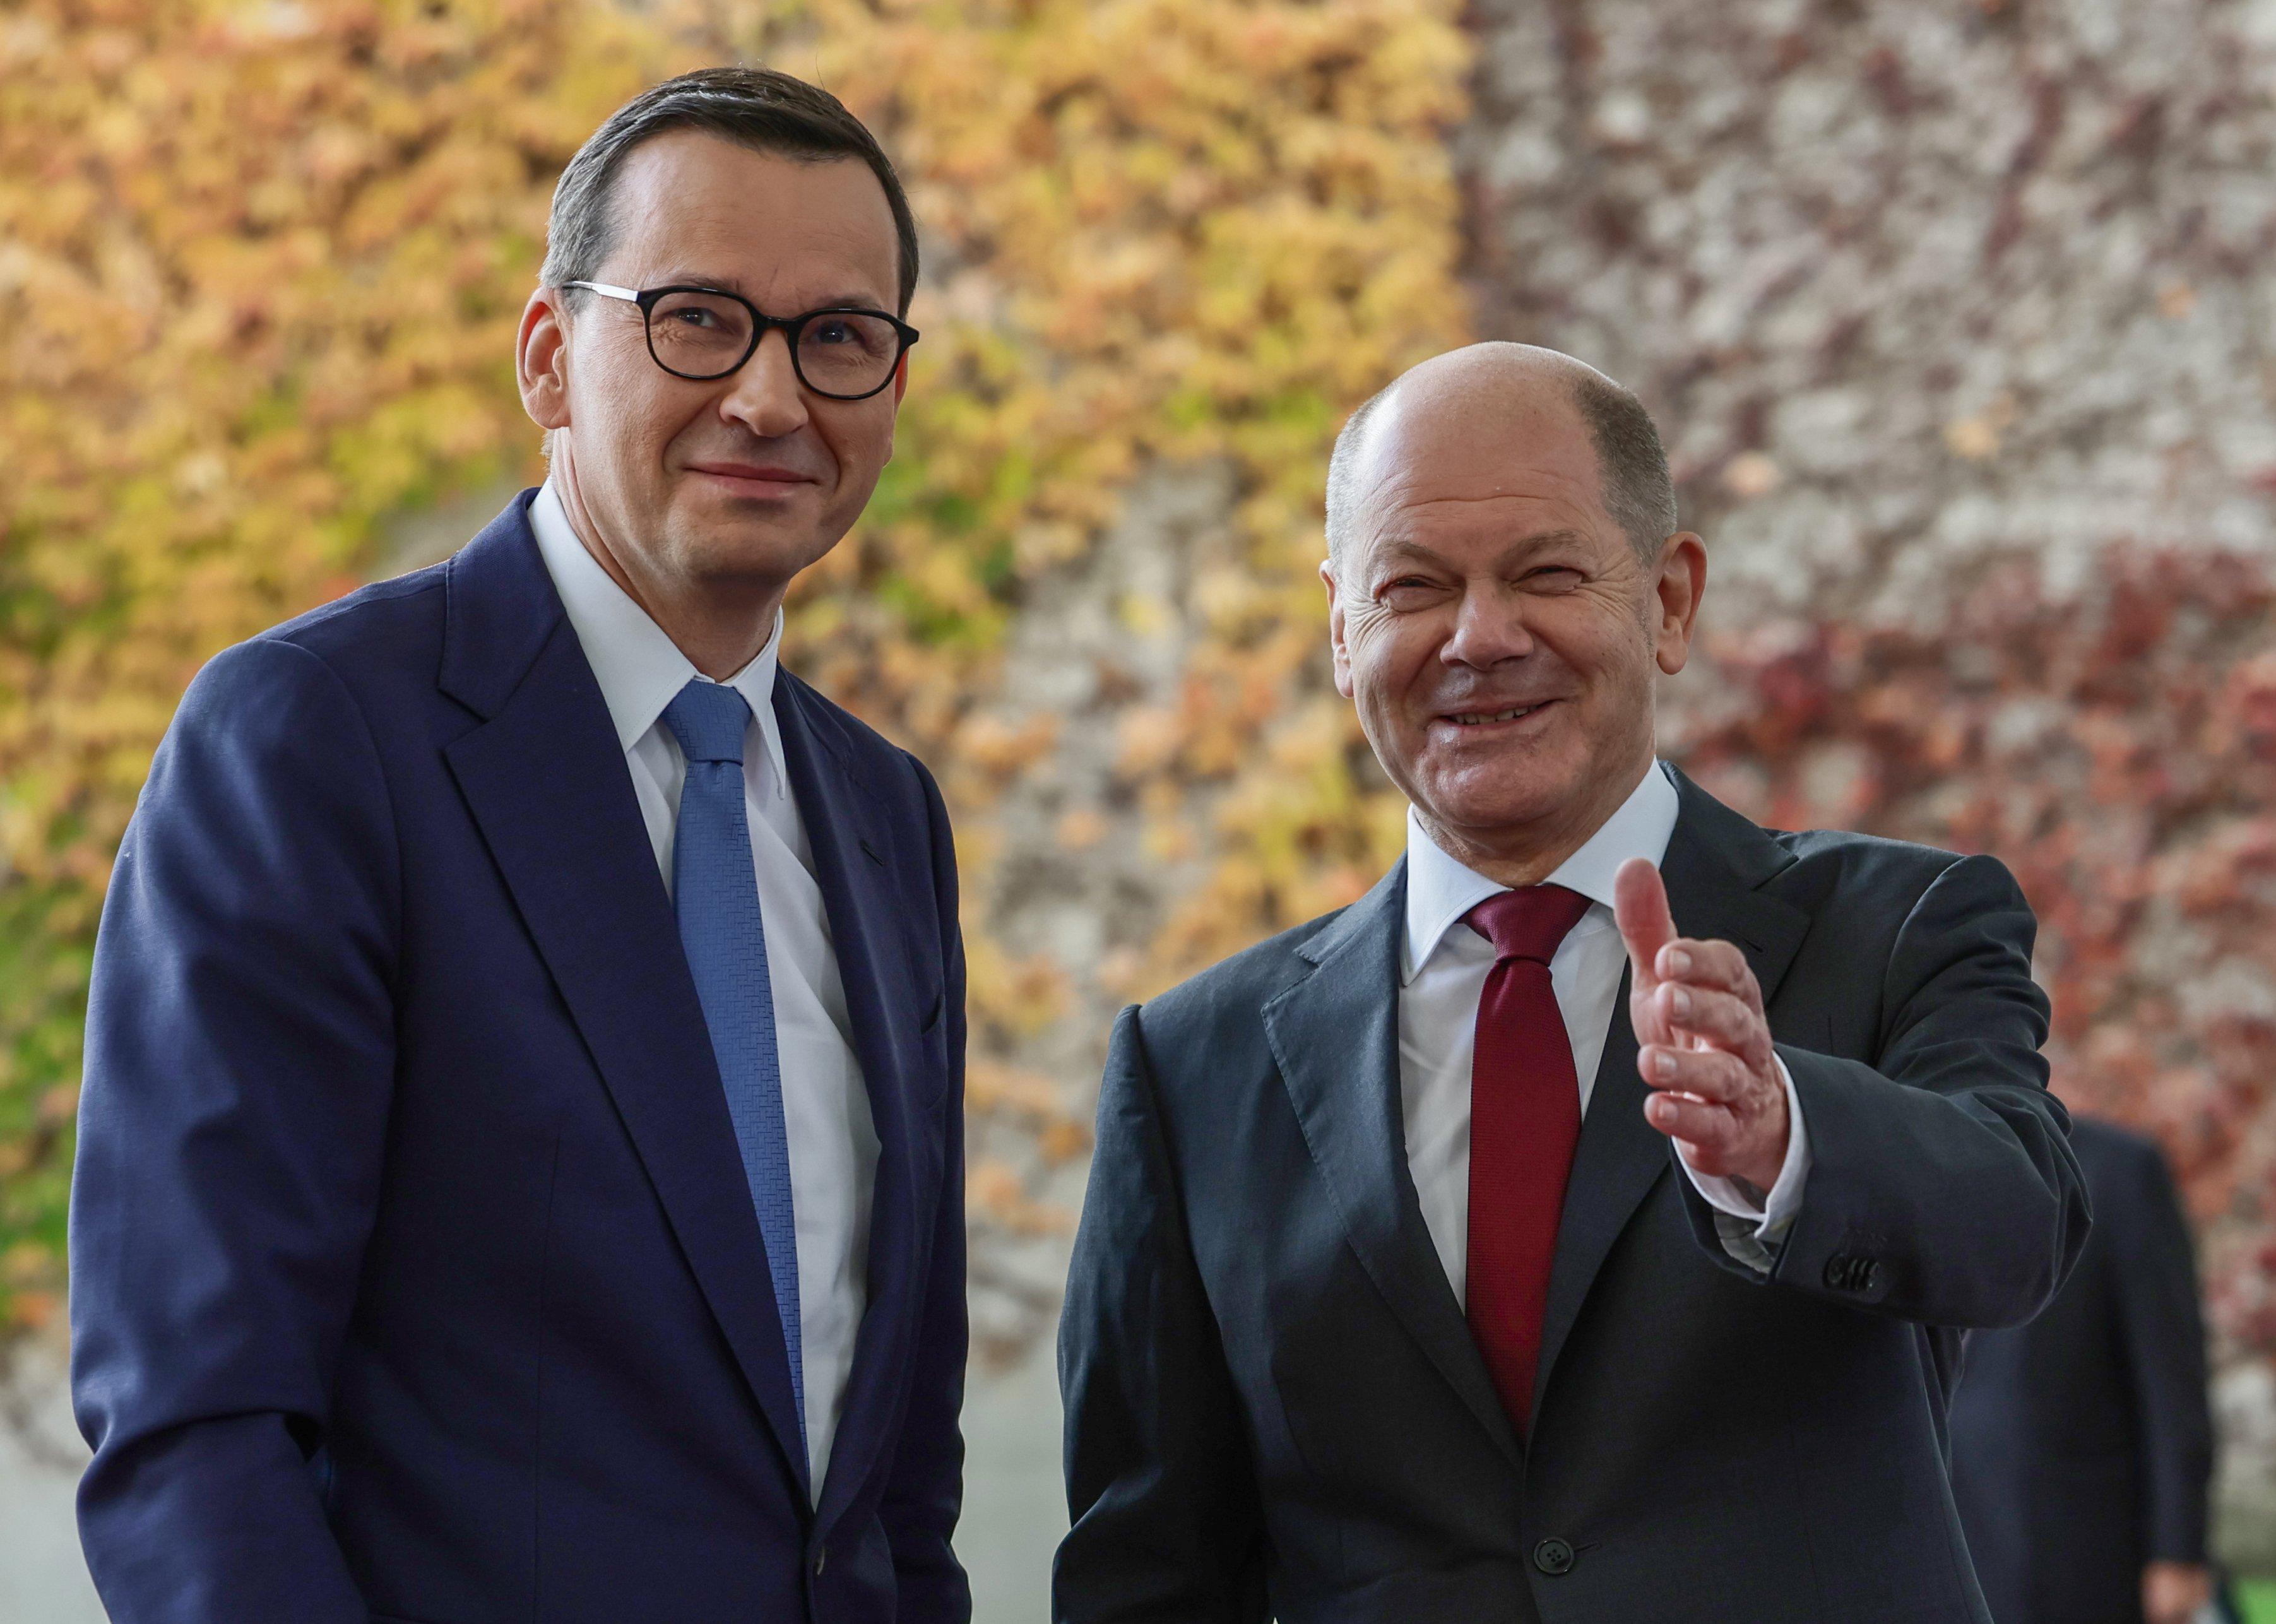 Poland's Prime Minister Mateusz Morawiecki is welcomed by German Chancellor Olaf Scholz for the Berlin Process 2022 Western Balkans Summit at the Chancellery in Berlin on November 3, 2022. (Photo by Jens Schlueter / AFP)